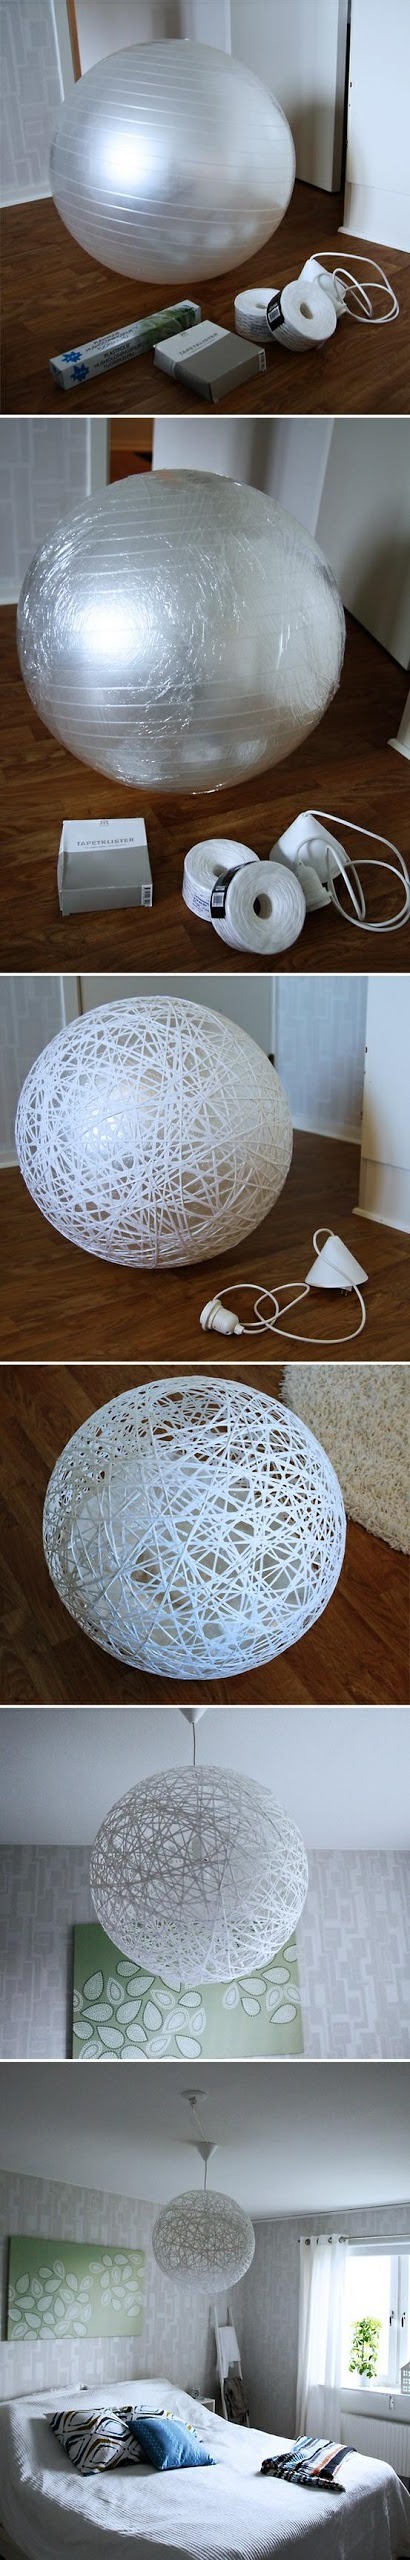 Do it yourself - make beautiful lampshade from string.jpg